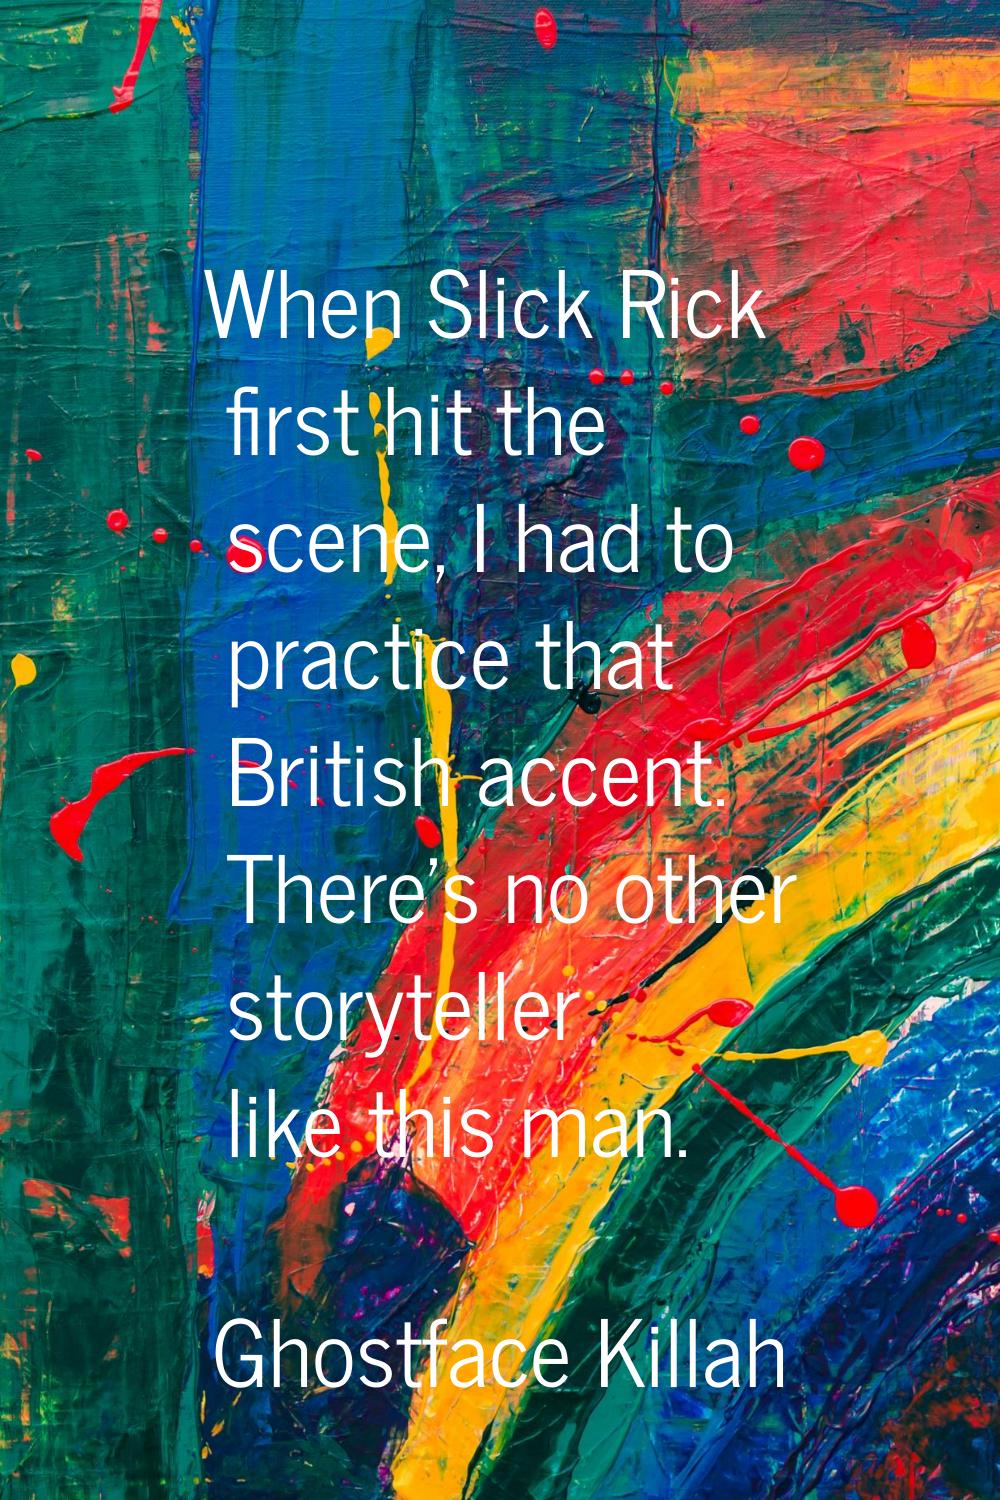 When Slick Rick first hit the scene, I had to practice that British accent. There's no other storyt